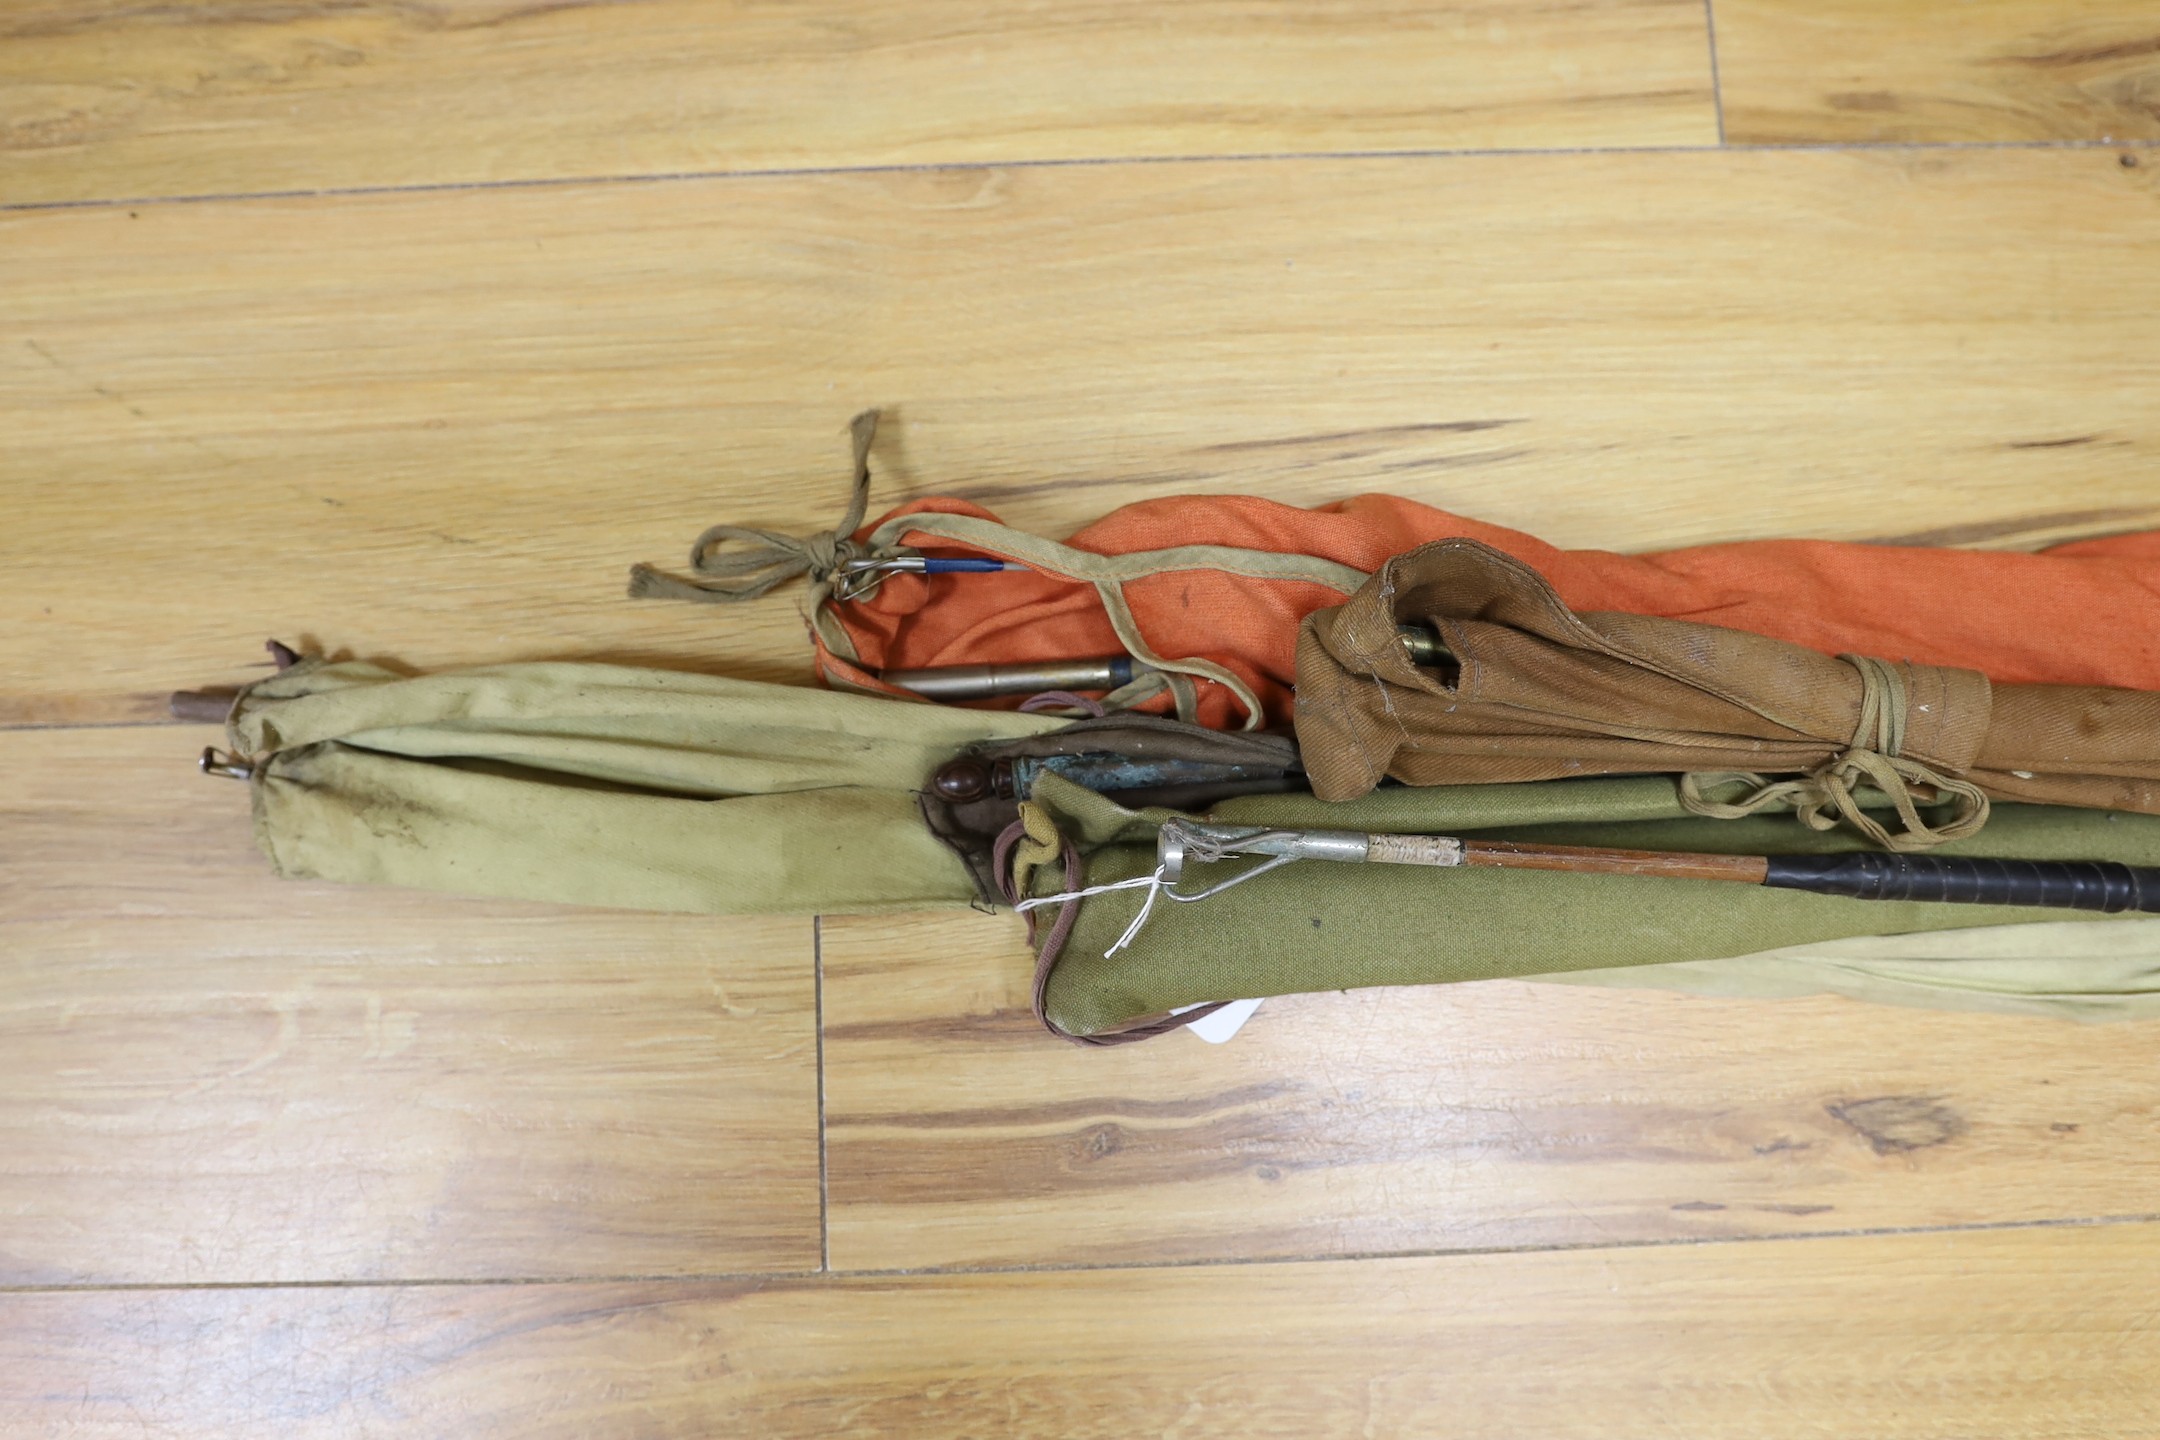 A quantity of fishing rods in fabric sleeves (6)